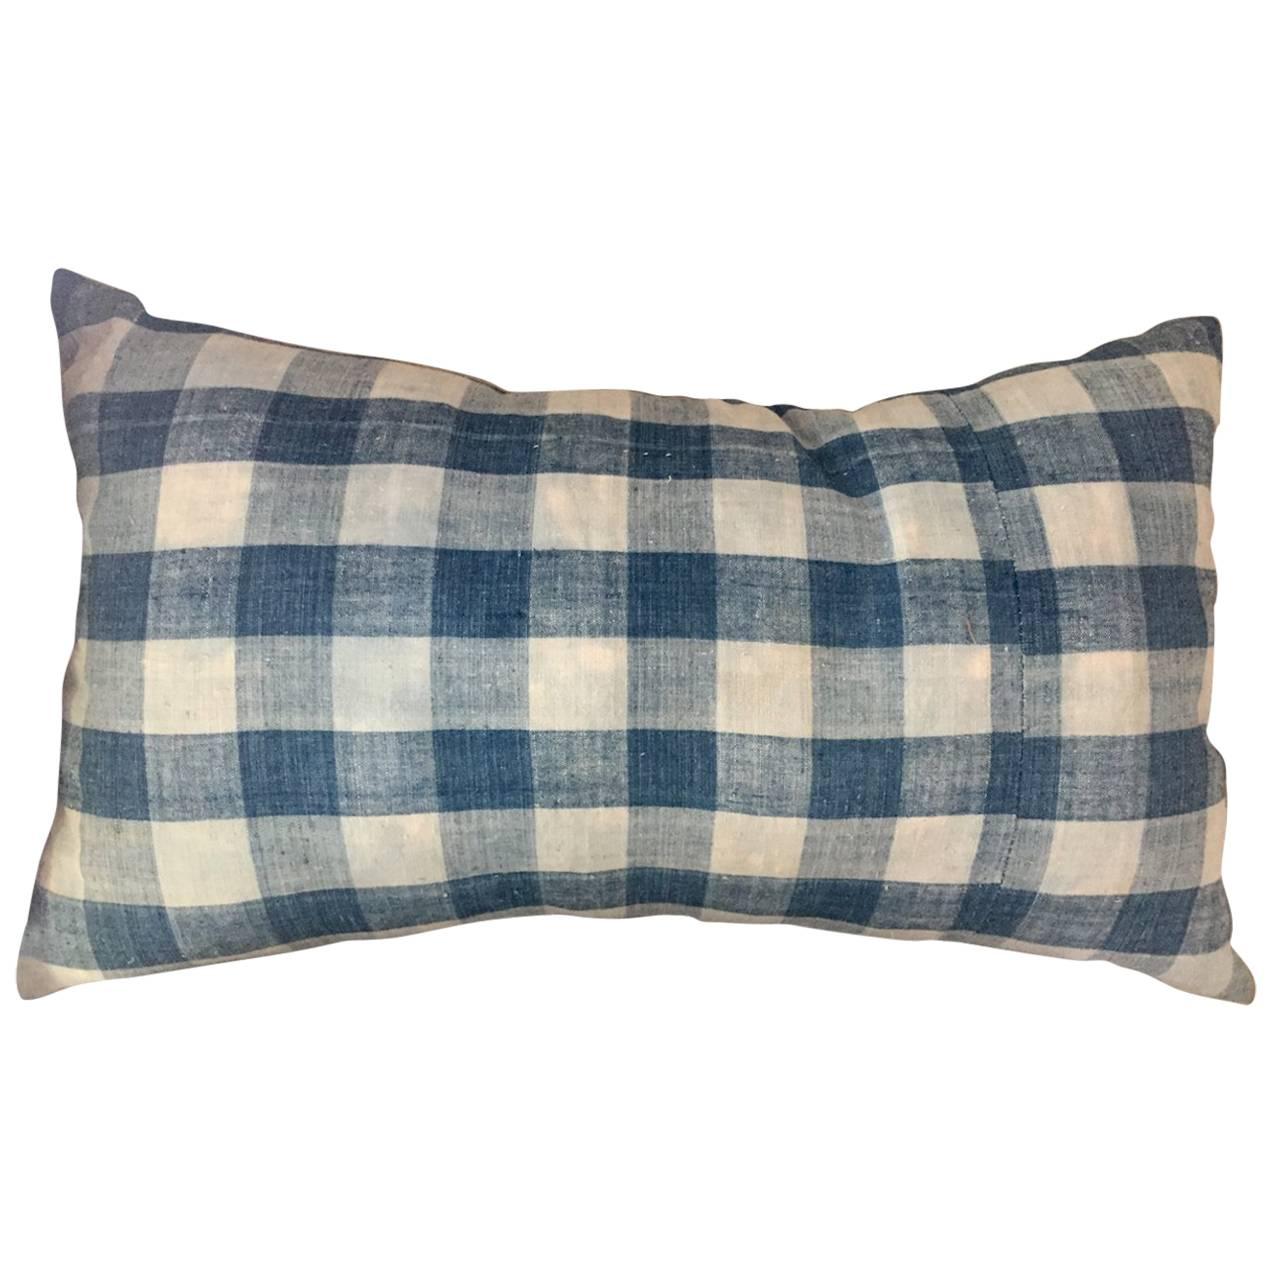 Mid-19th Century French Home Spun Indigo Dyed Check Pillow #10 For Sale